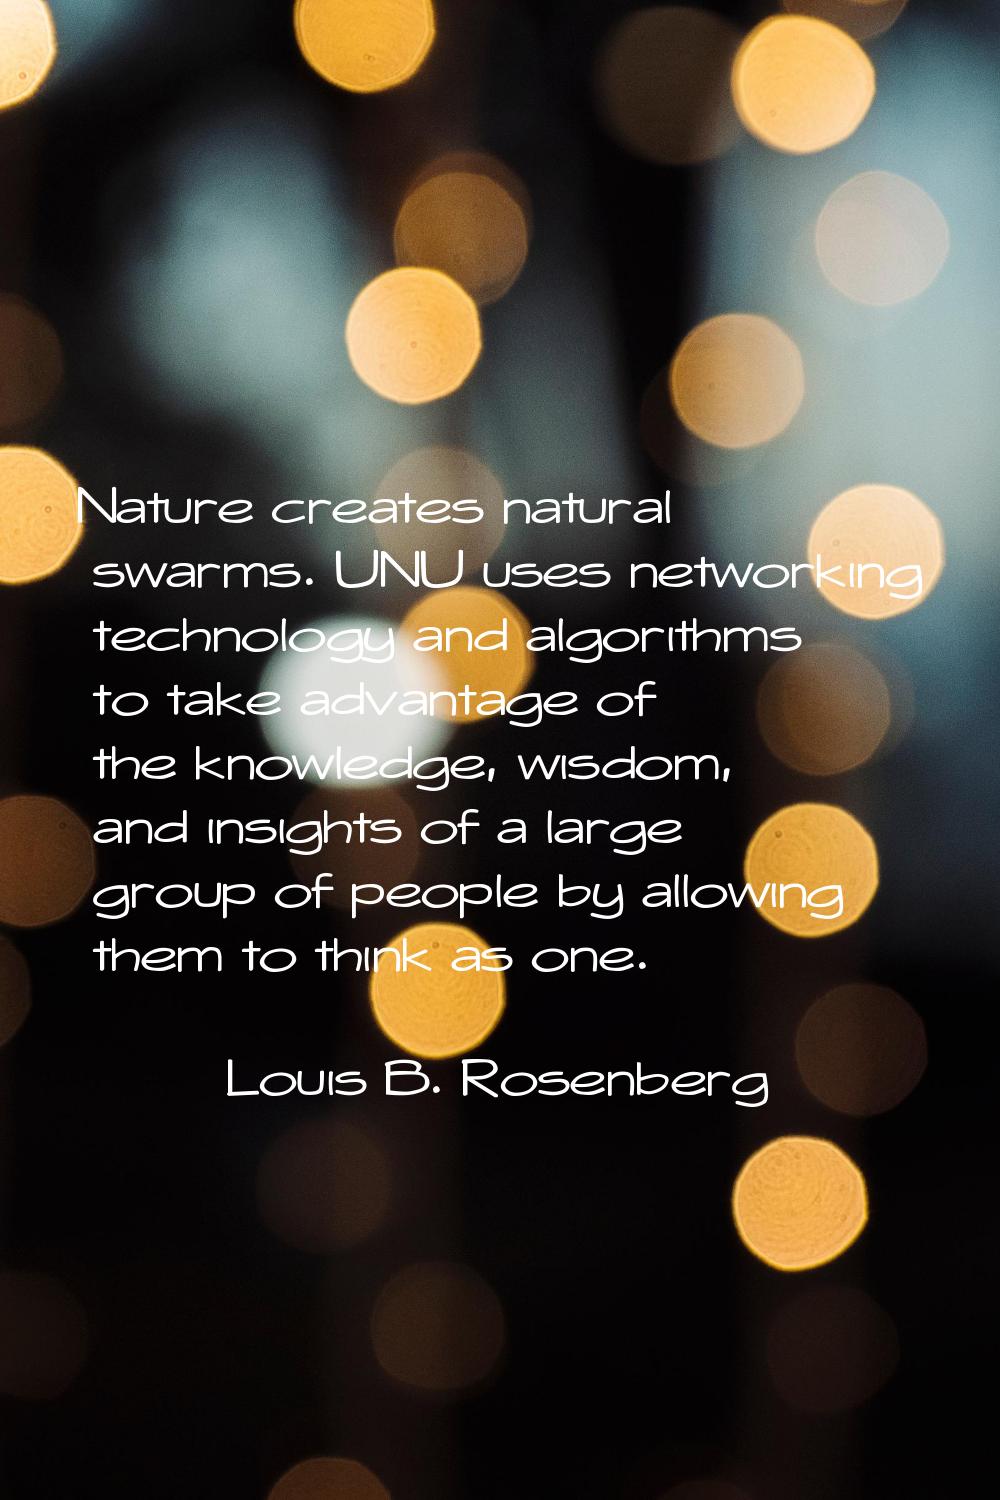 Nature creates natural swarms. UNU uses networking technology and algorithms to take advantage of t